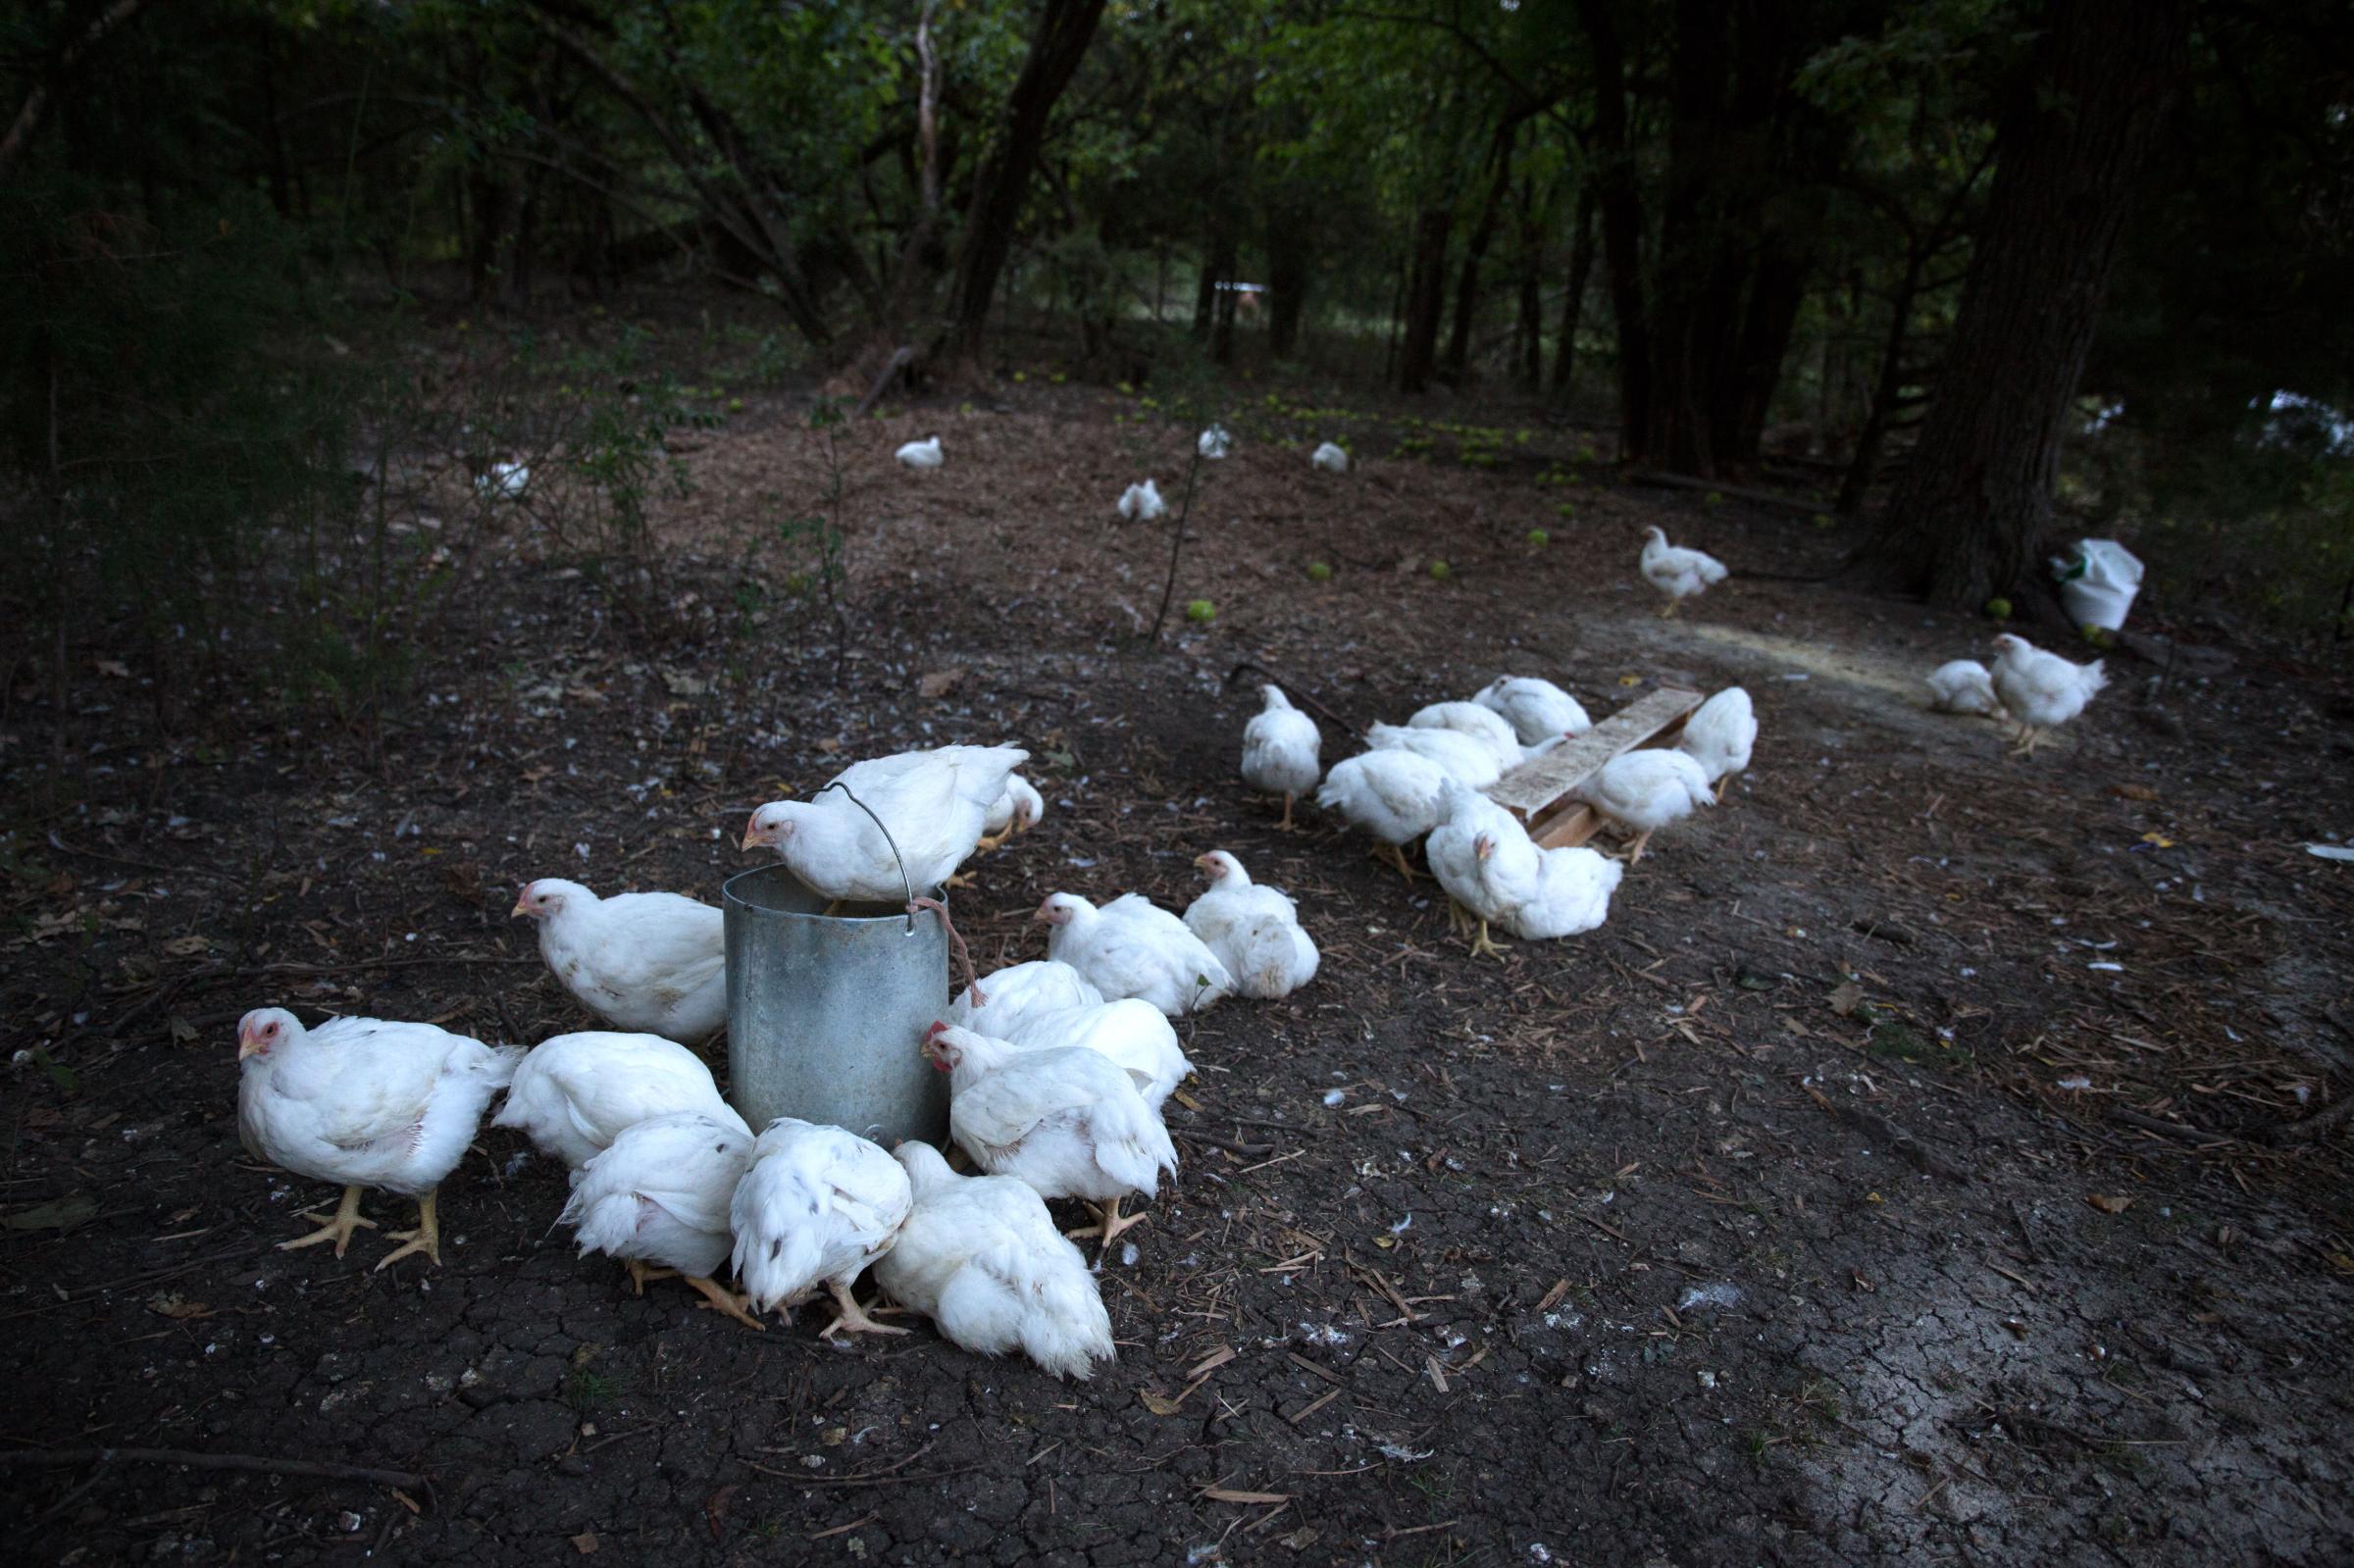 Land Bound in the Ozarks - As the sun sets, the Whites free-range chickens enjoy...